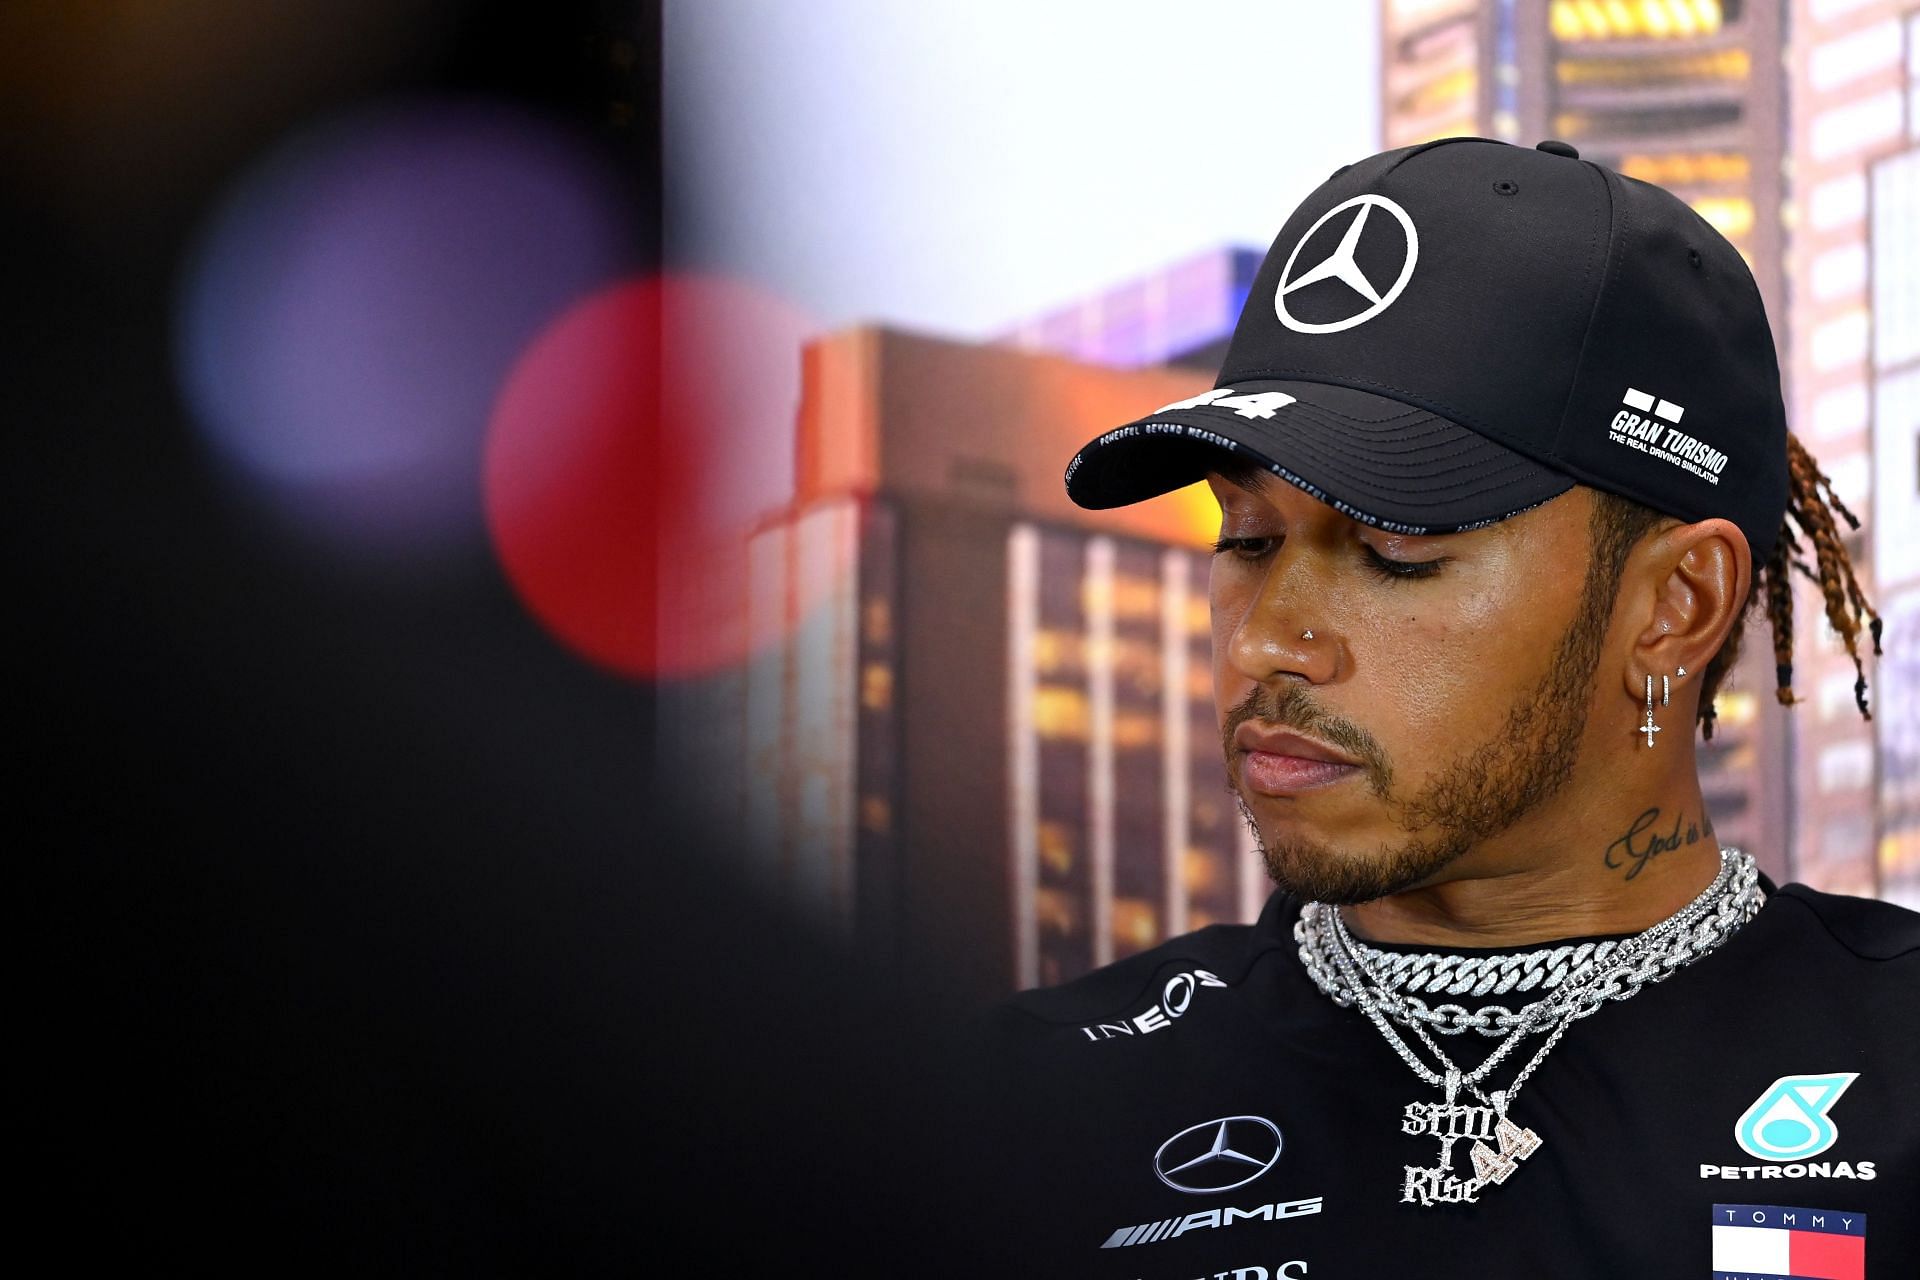 Lewis Hamilton has remained silent on social media since his disappointment at the Abu Dhabi Grand Prix